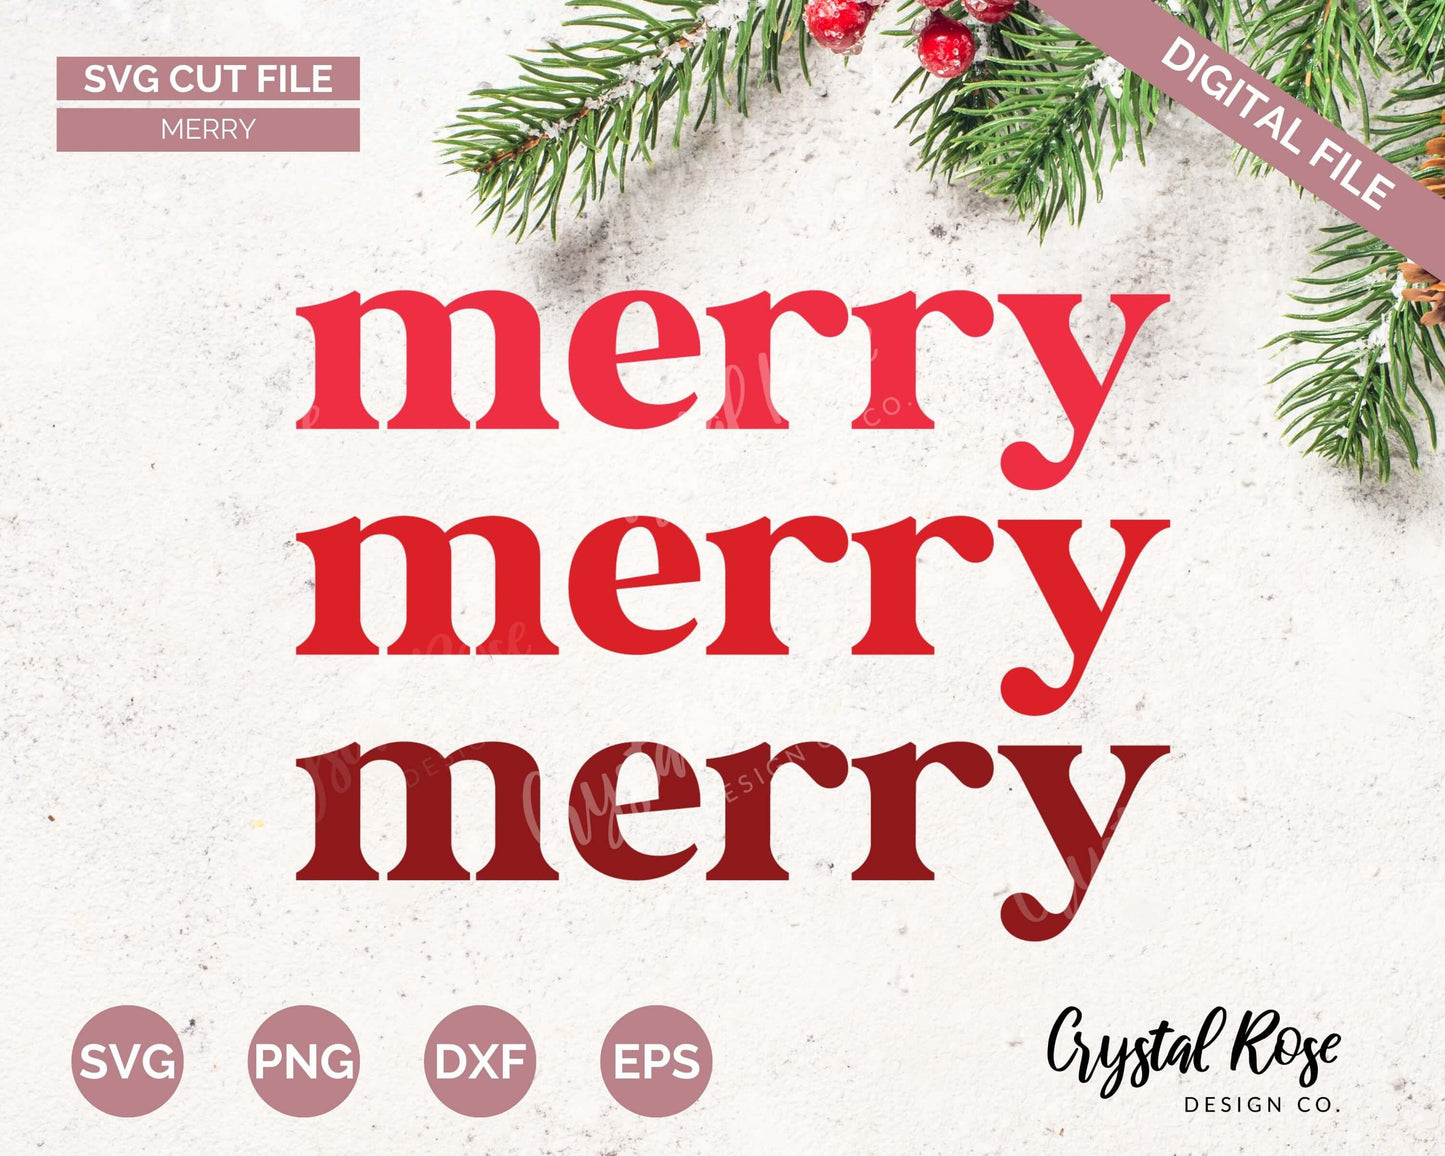 Merry Merry Merry Christmas SVG, Digital Download, Cricut, Silhouette, Glowforge (includes svg/png/dxf/eps) - Crystal Rose Design Co.